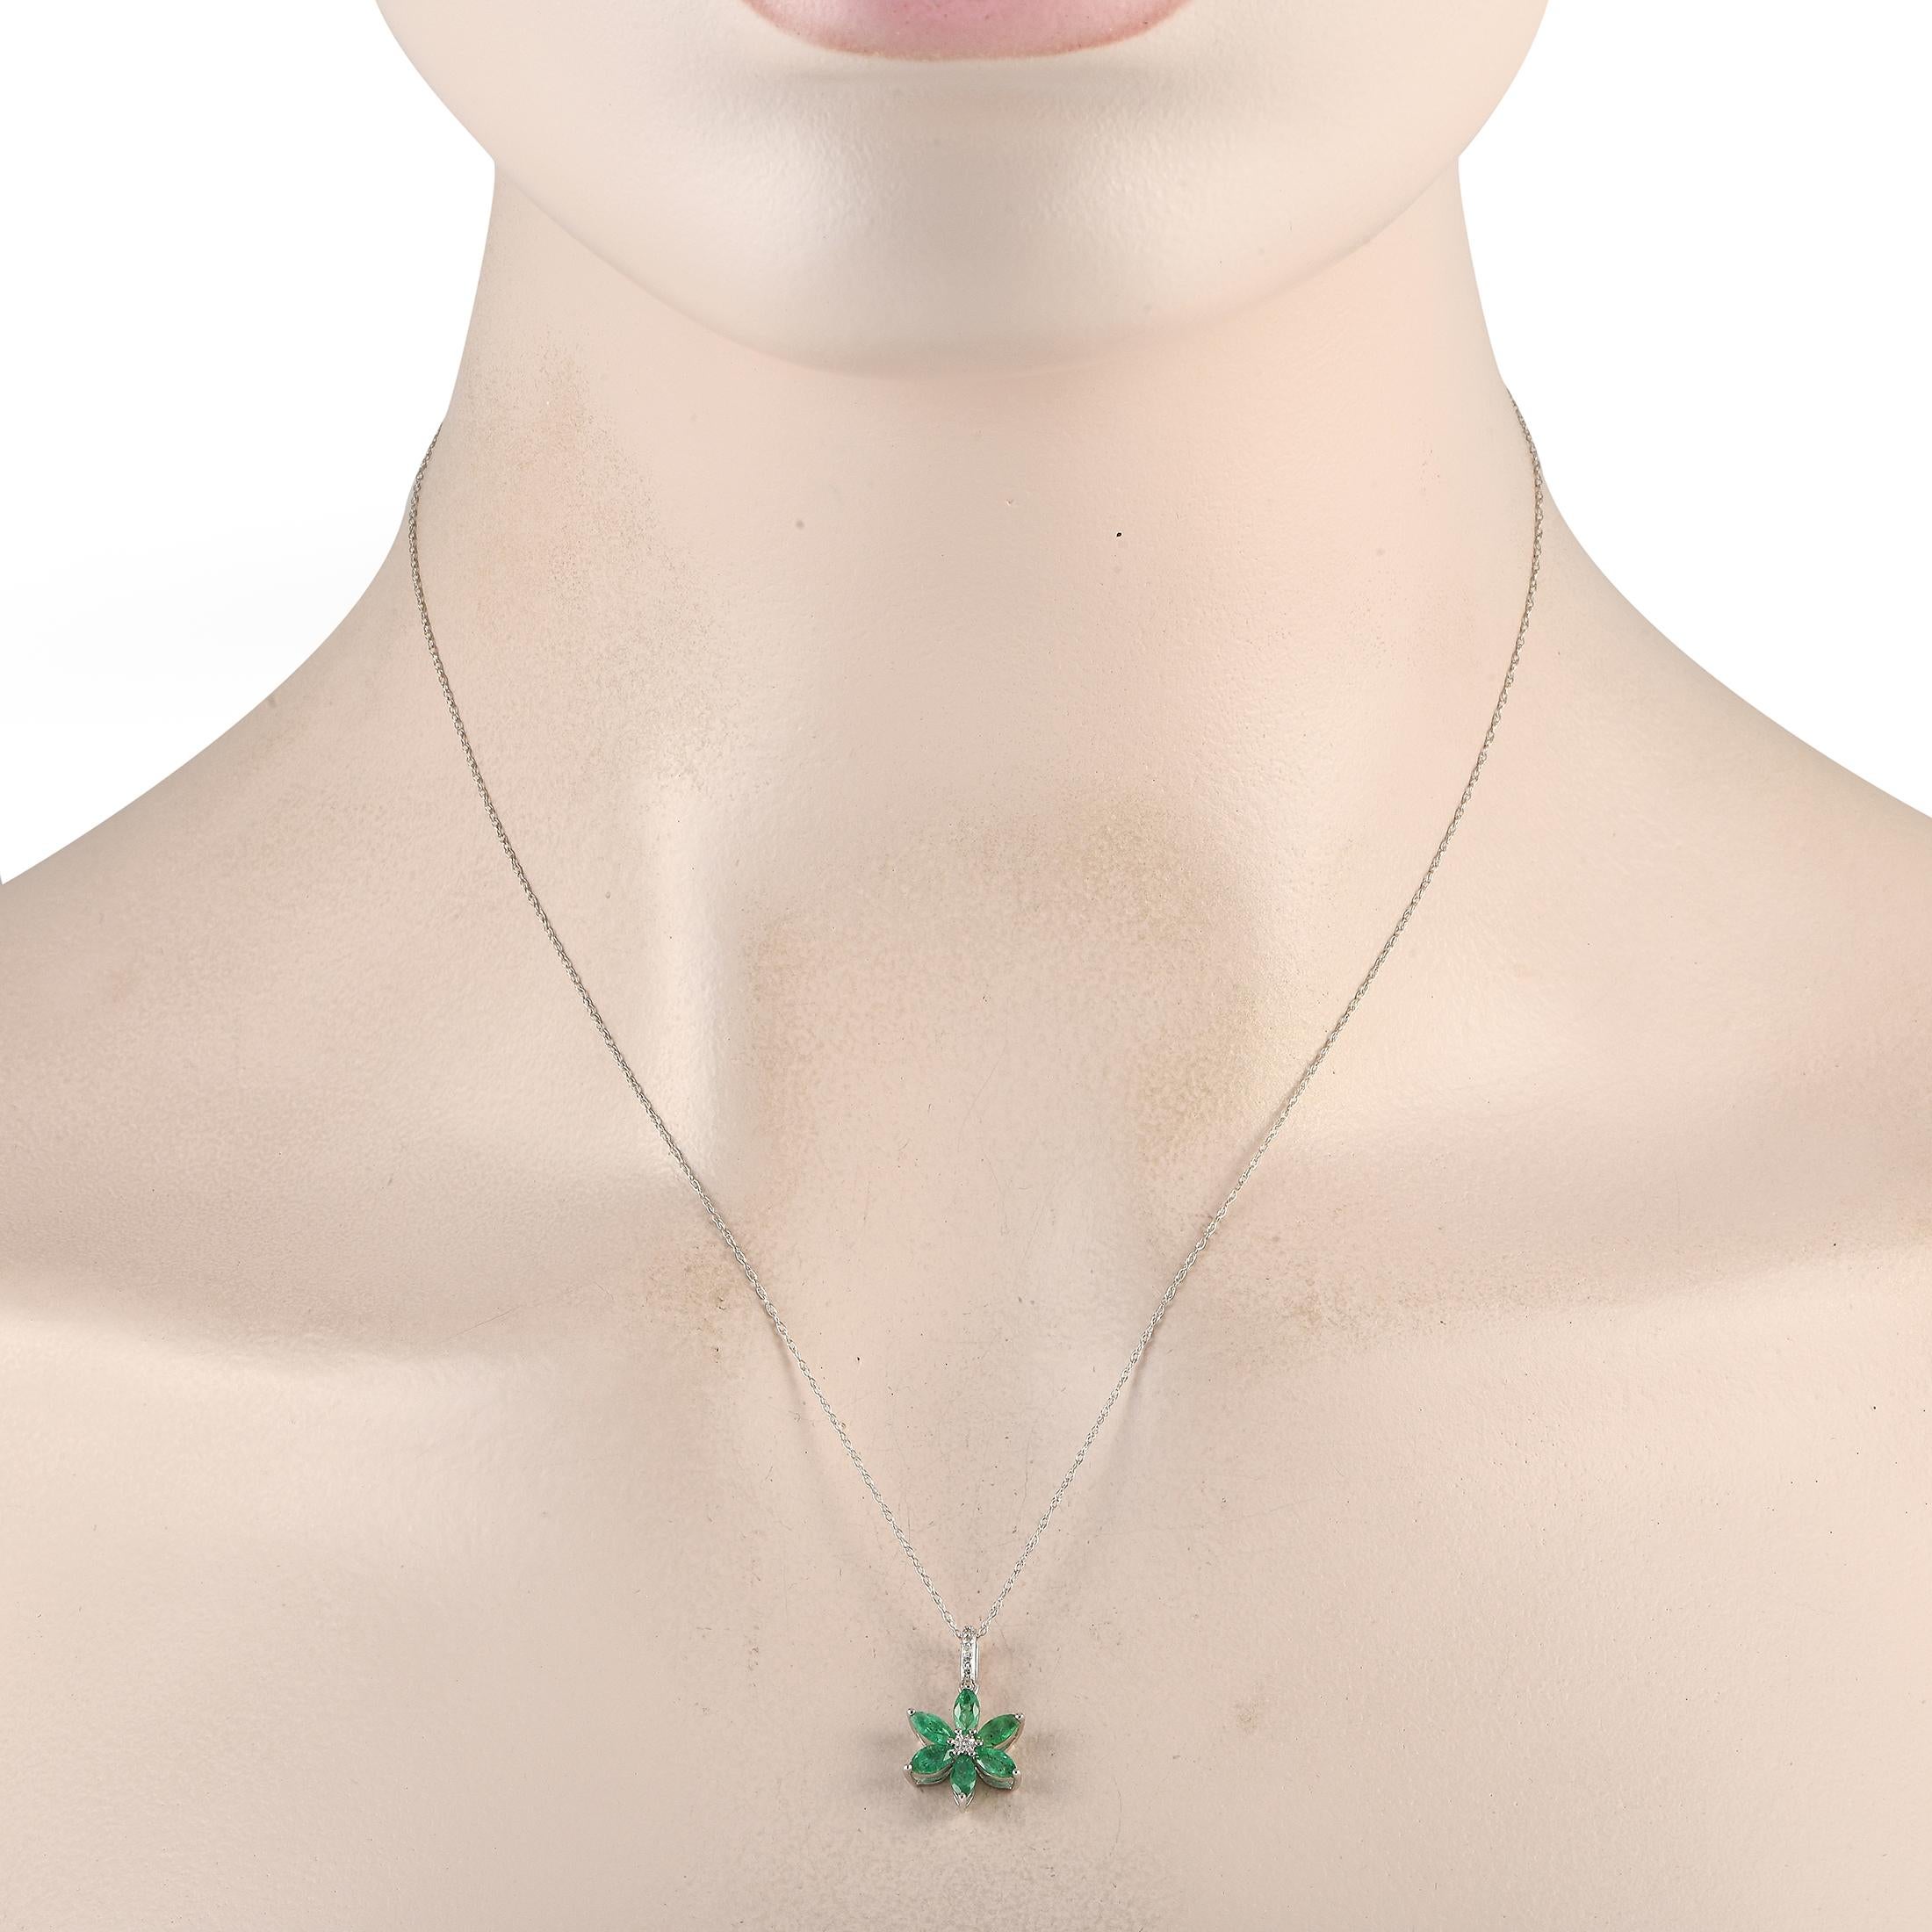 A charming 14K white gold floral pendant takes center stage on this exquisite necklace. Emerald petals provide the perfect pop of color, while diamonds with a total weight of 0.01 carats serve as a stylish finishing touch. This pieces pendant